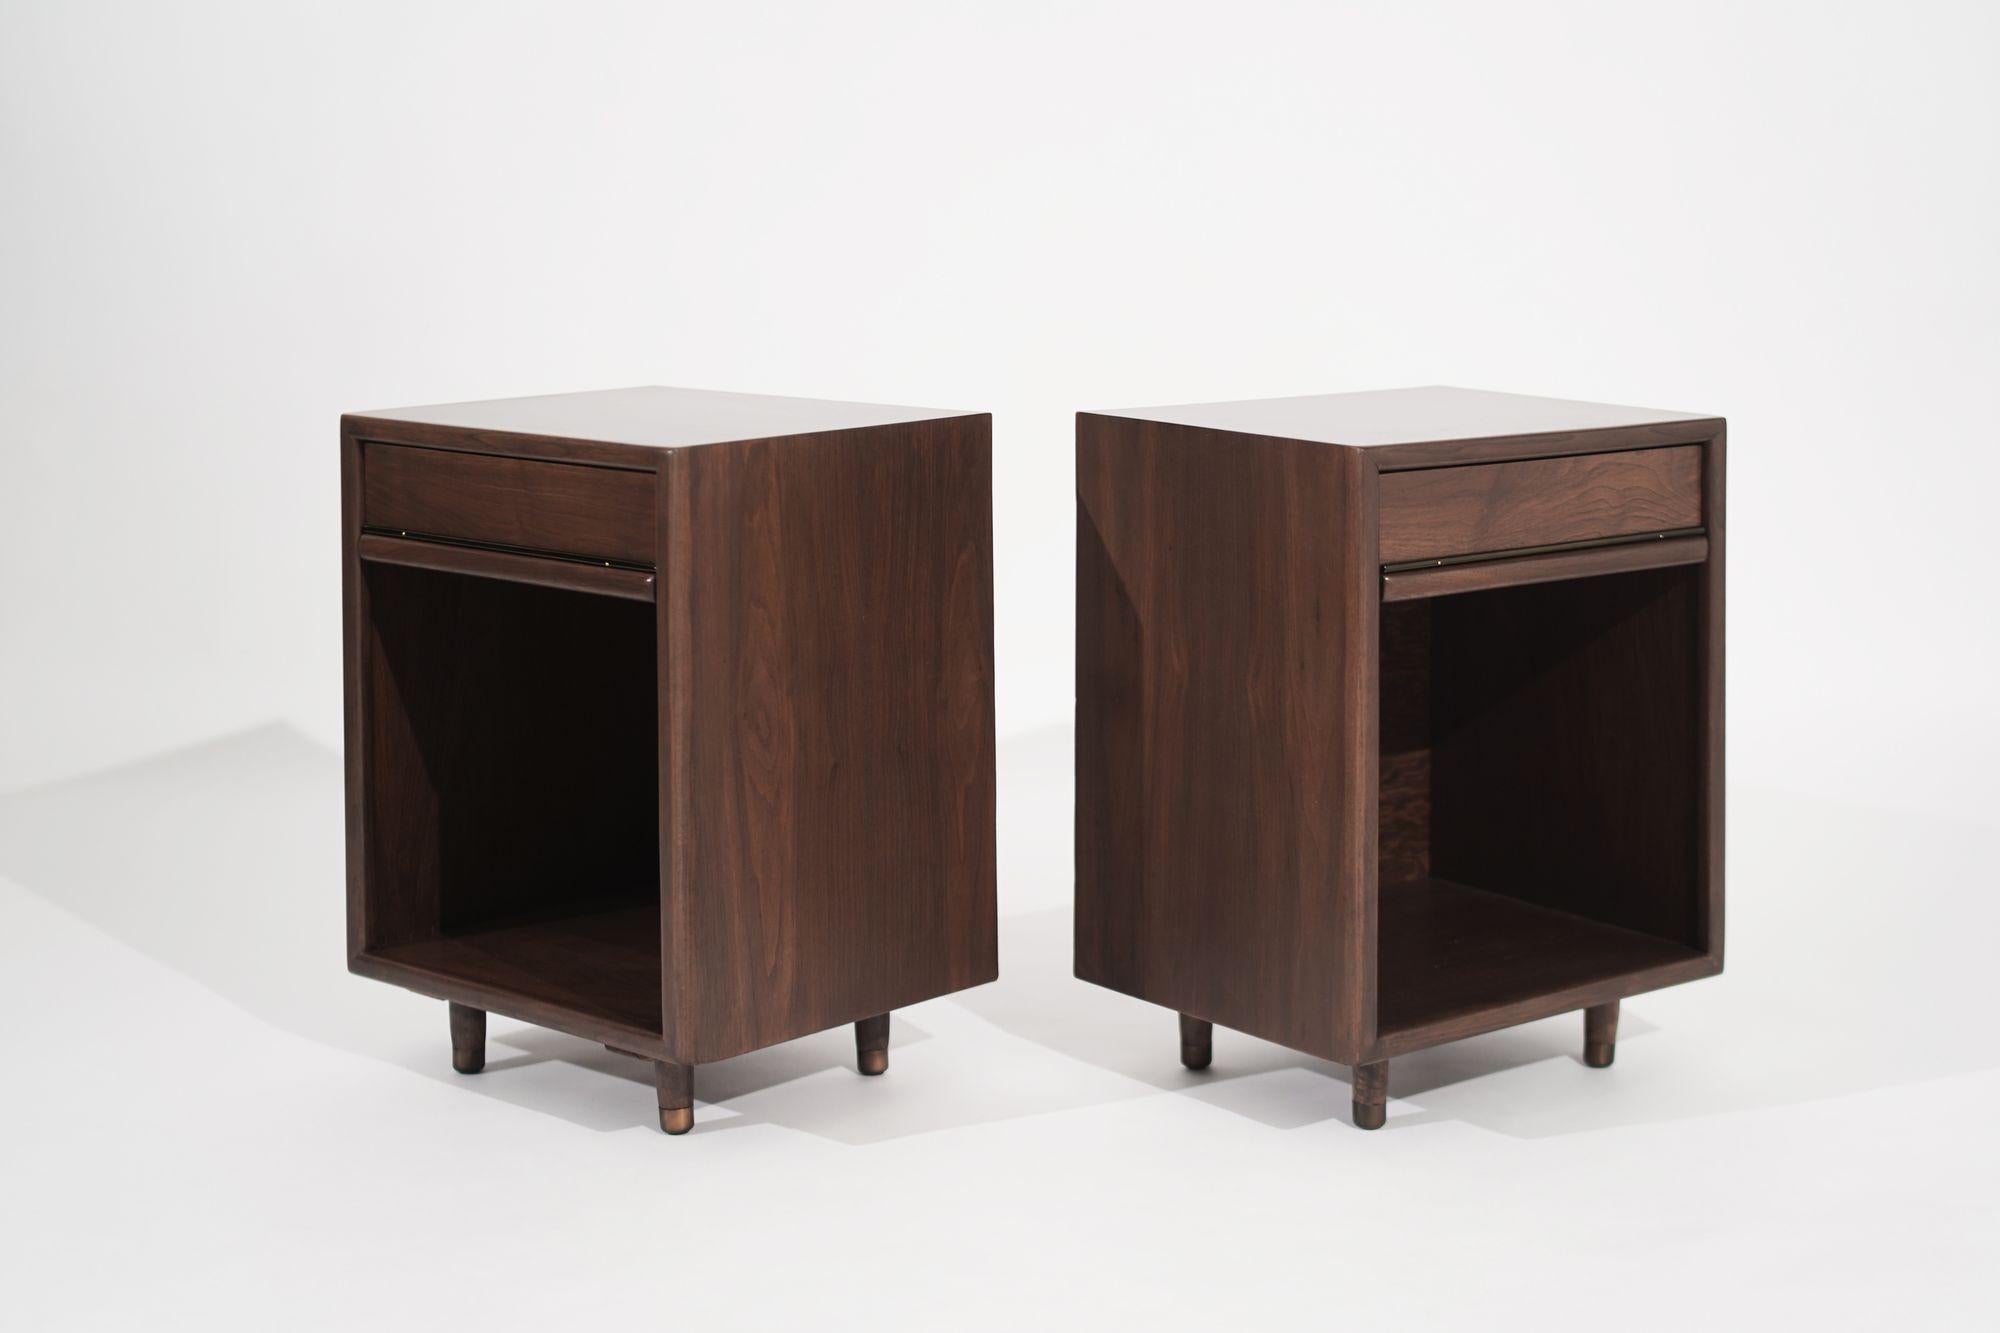 Set of Minimalist Walnut End Tables, C. 1950s In Excellent Condition For Sale In Westport, CT